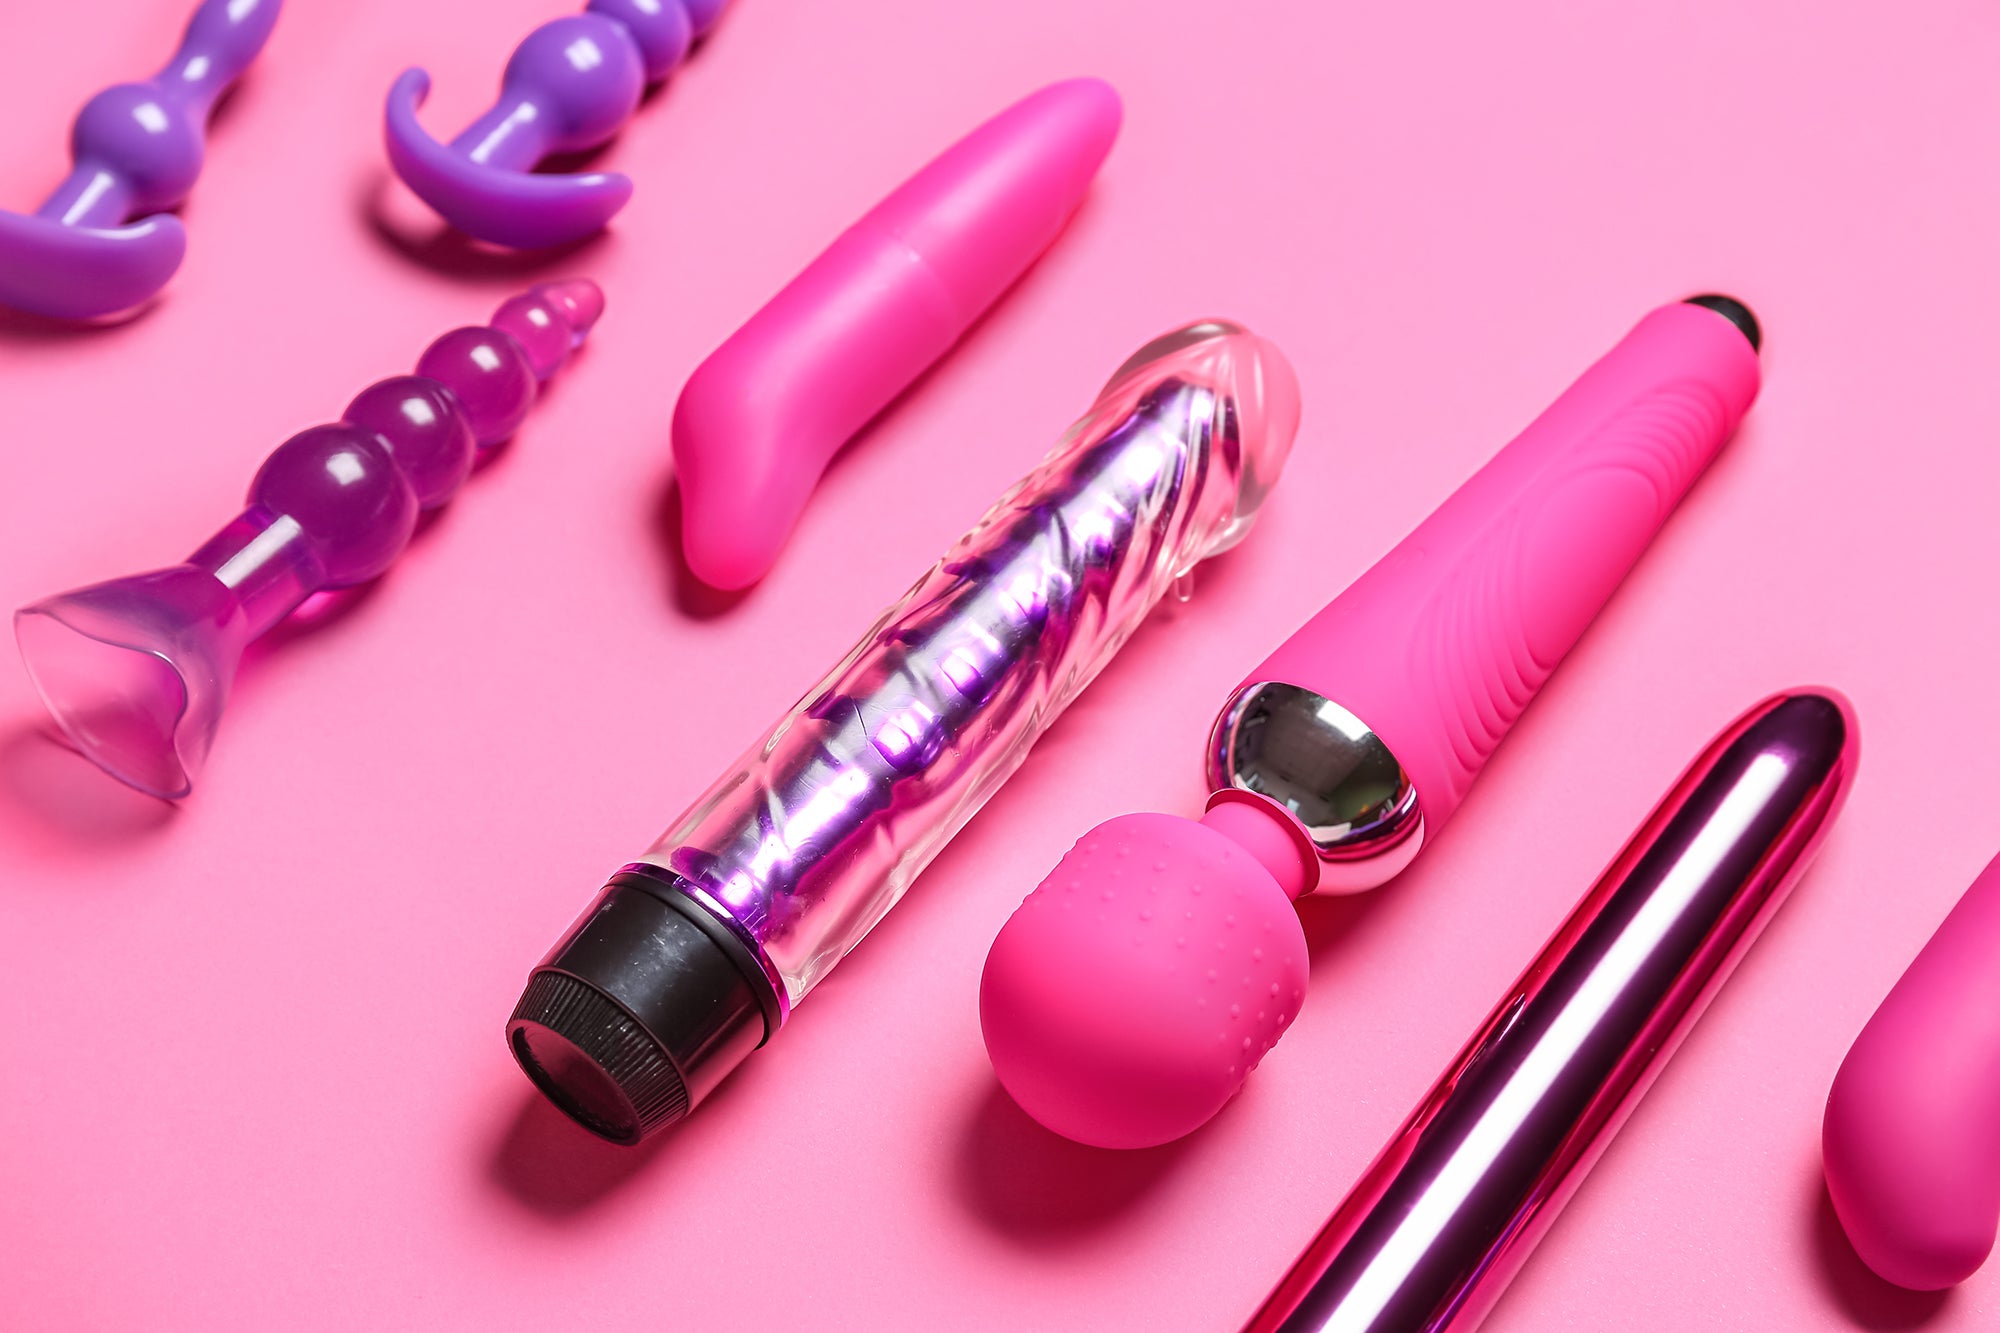 Vibrator or dildo: Which one is right for you?